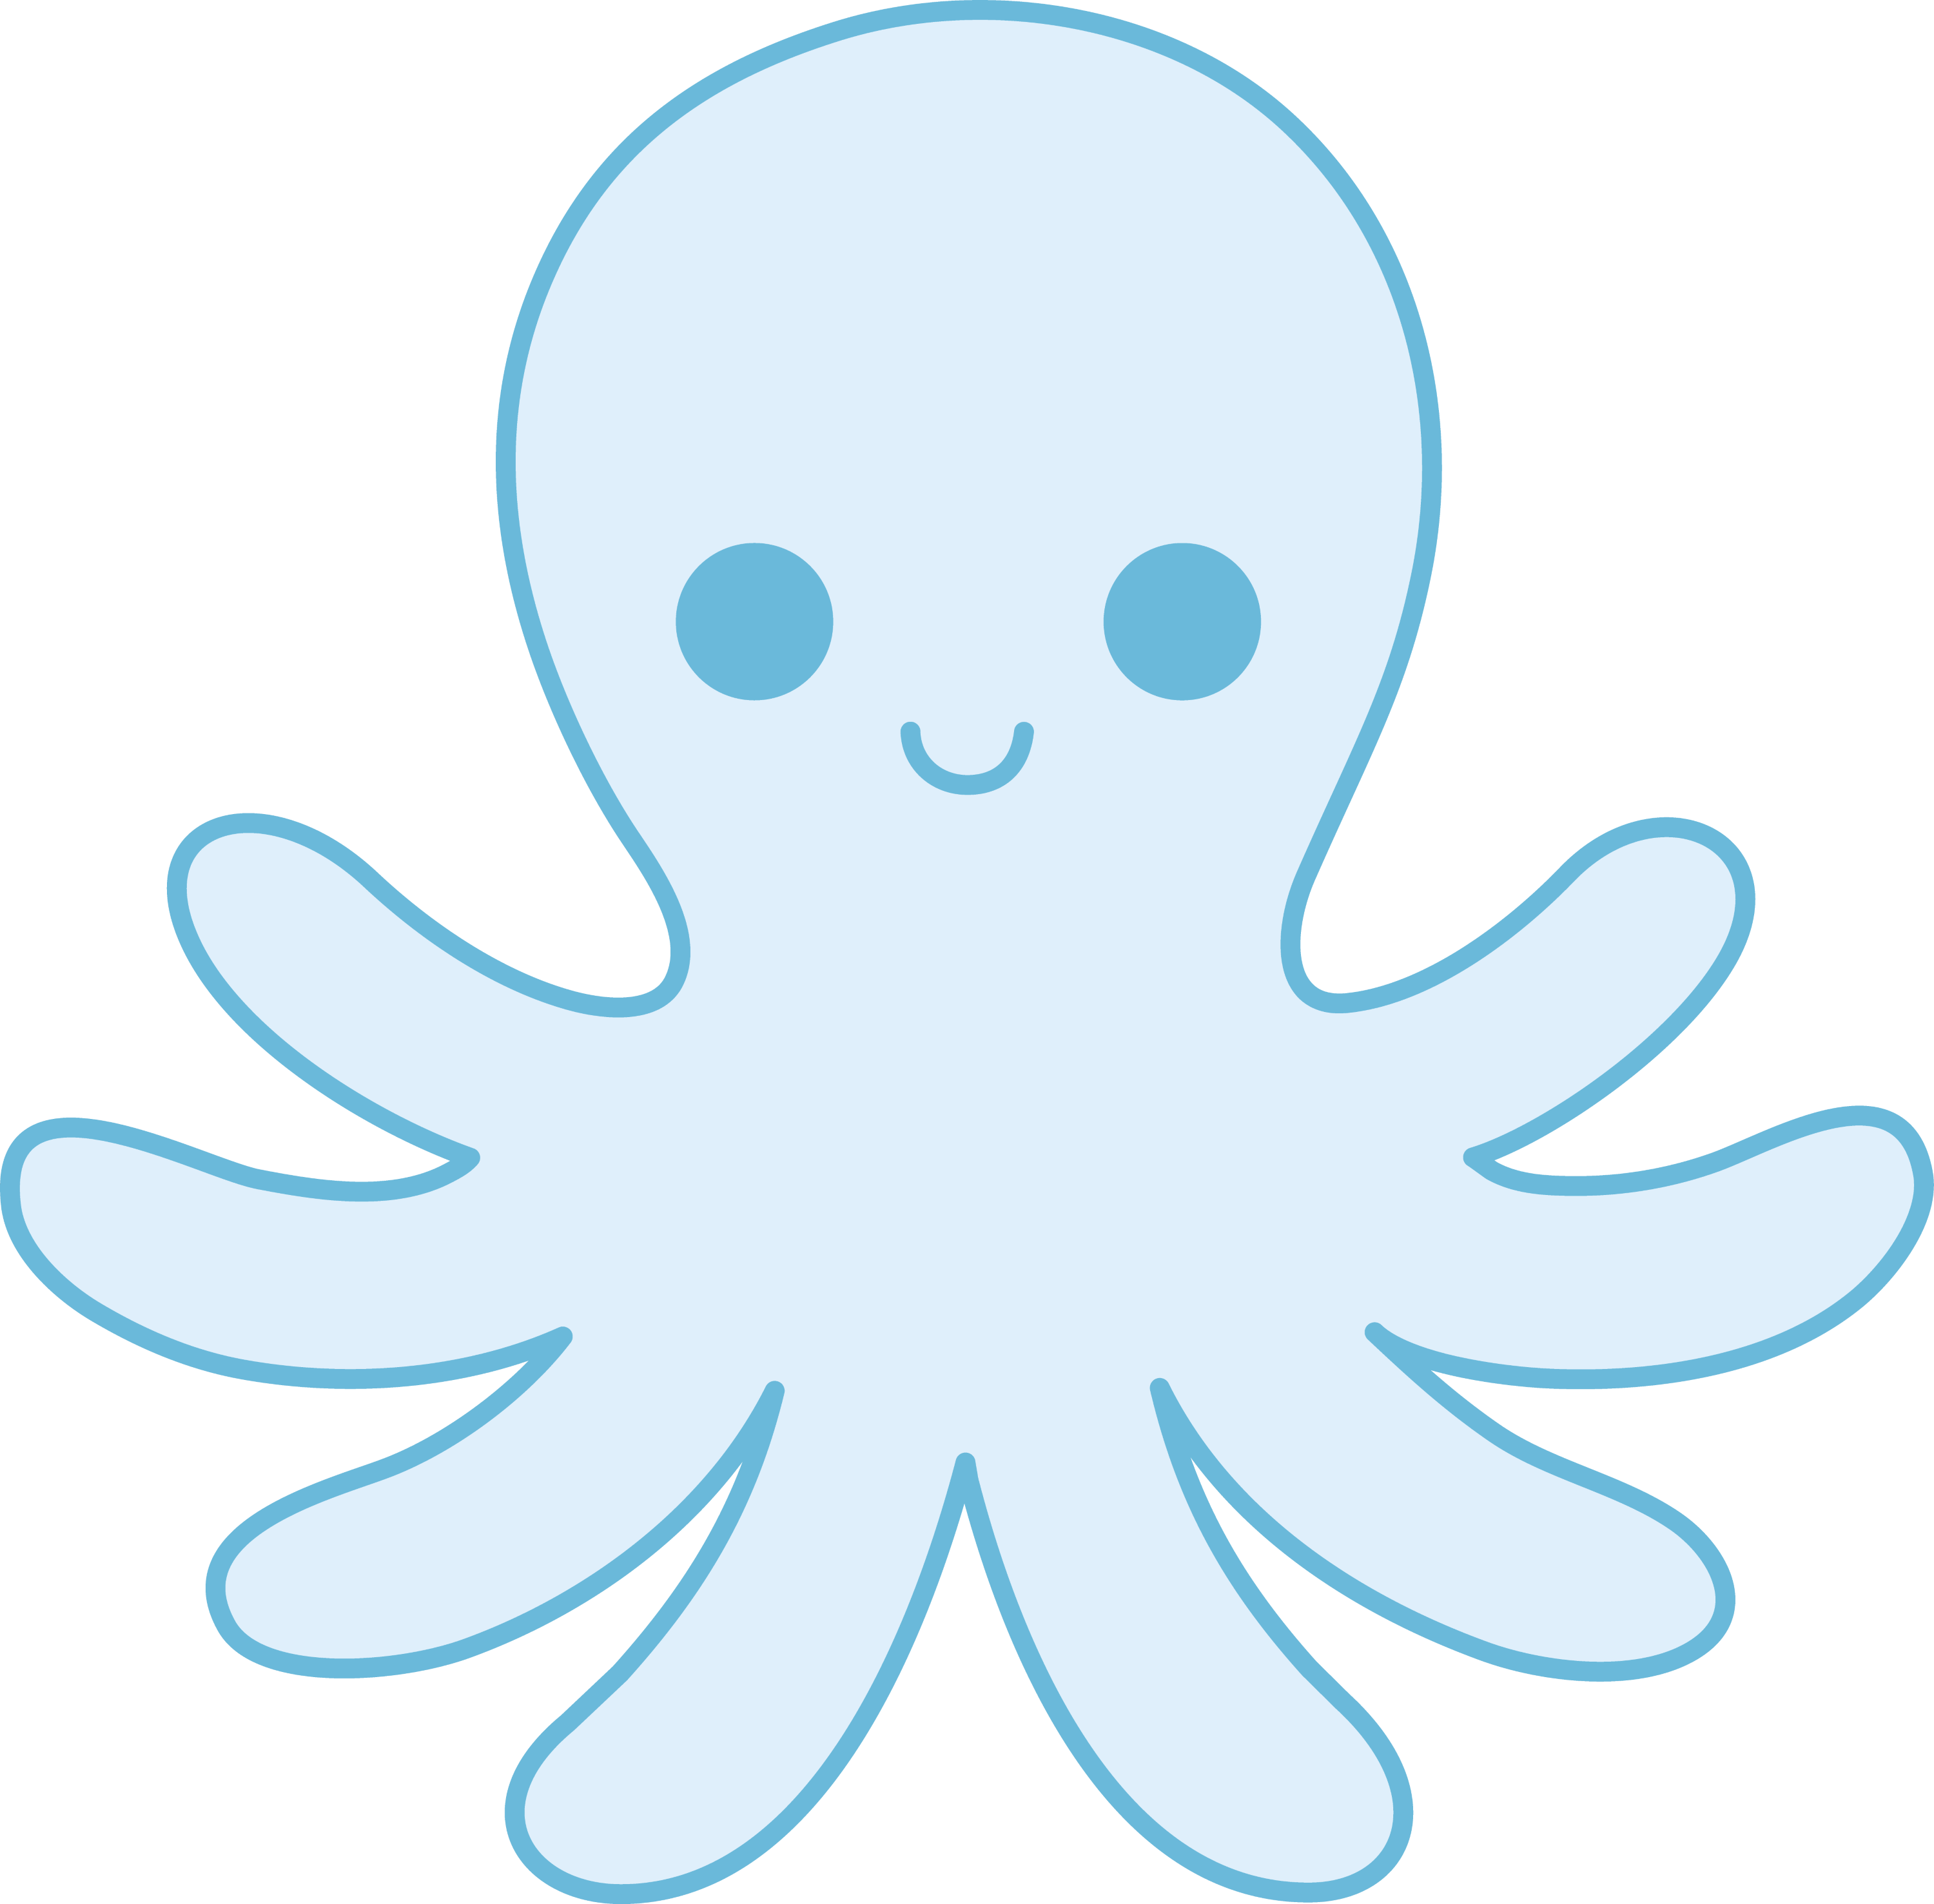 clipart of octopus - photo #16